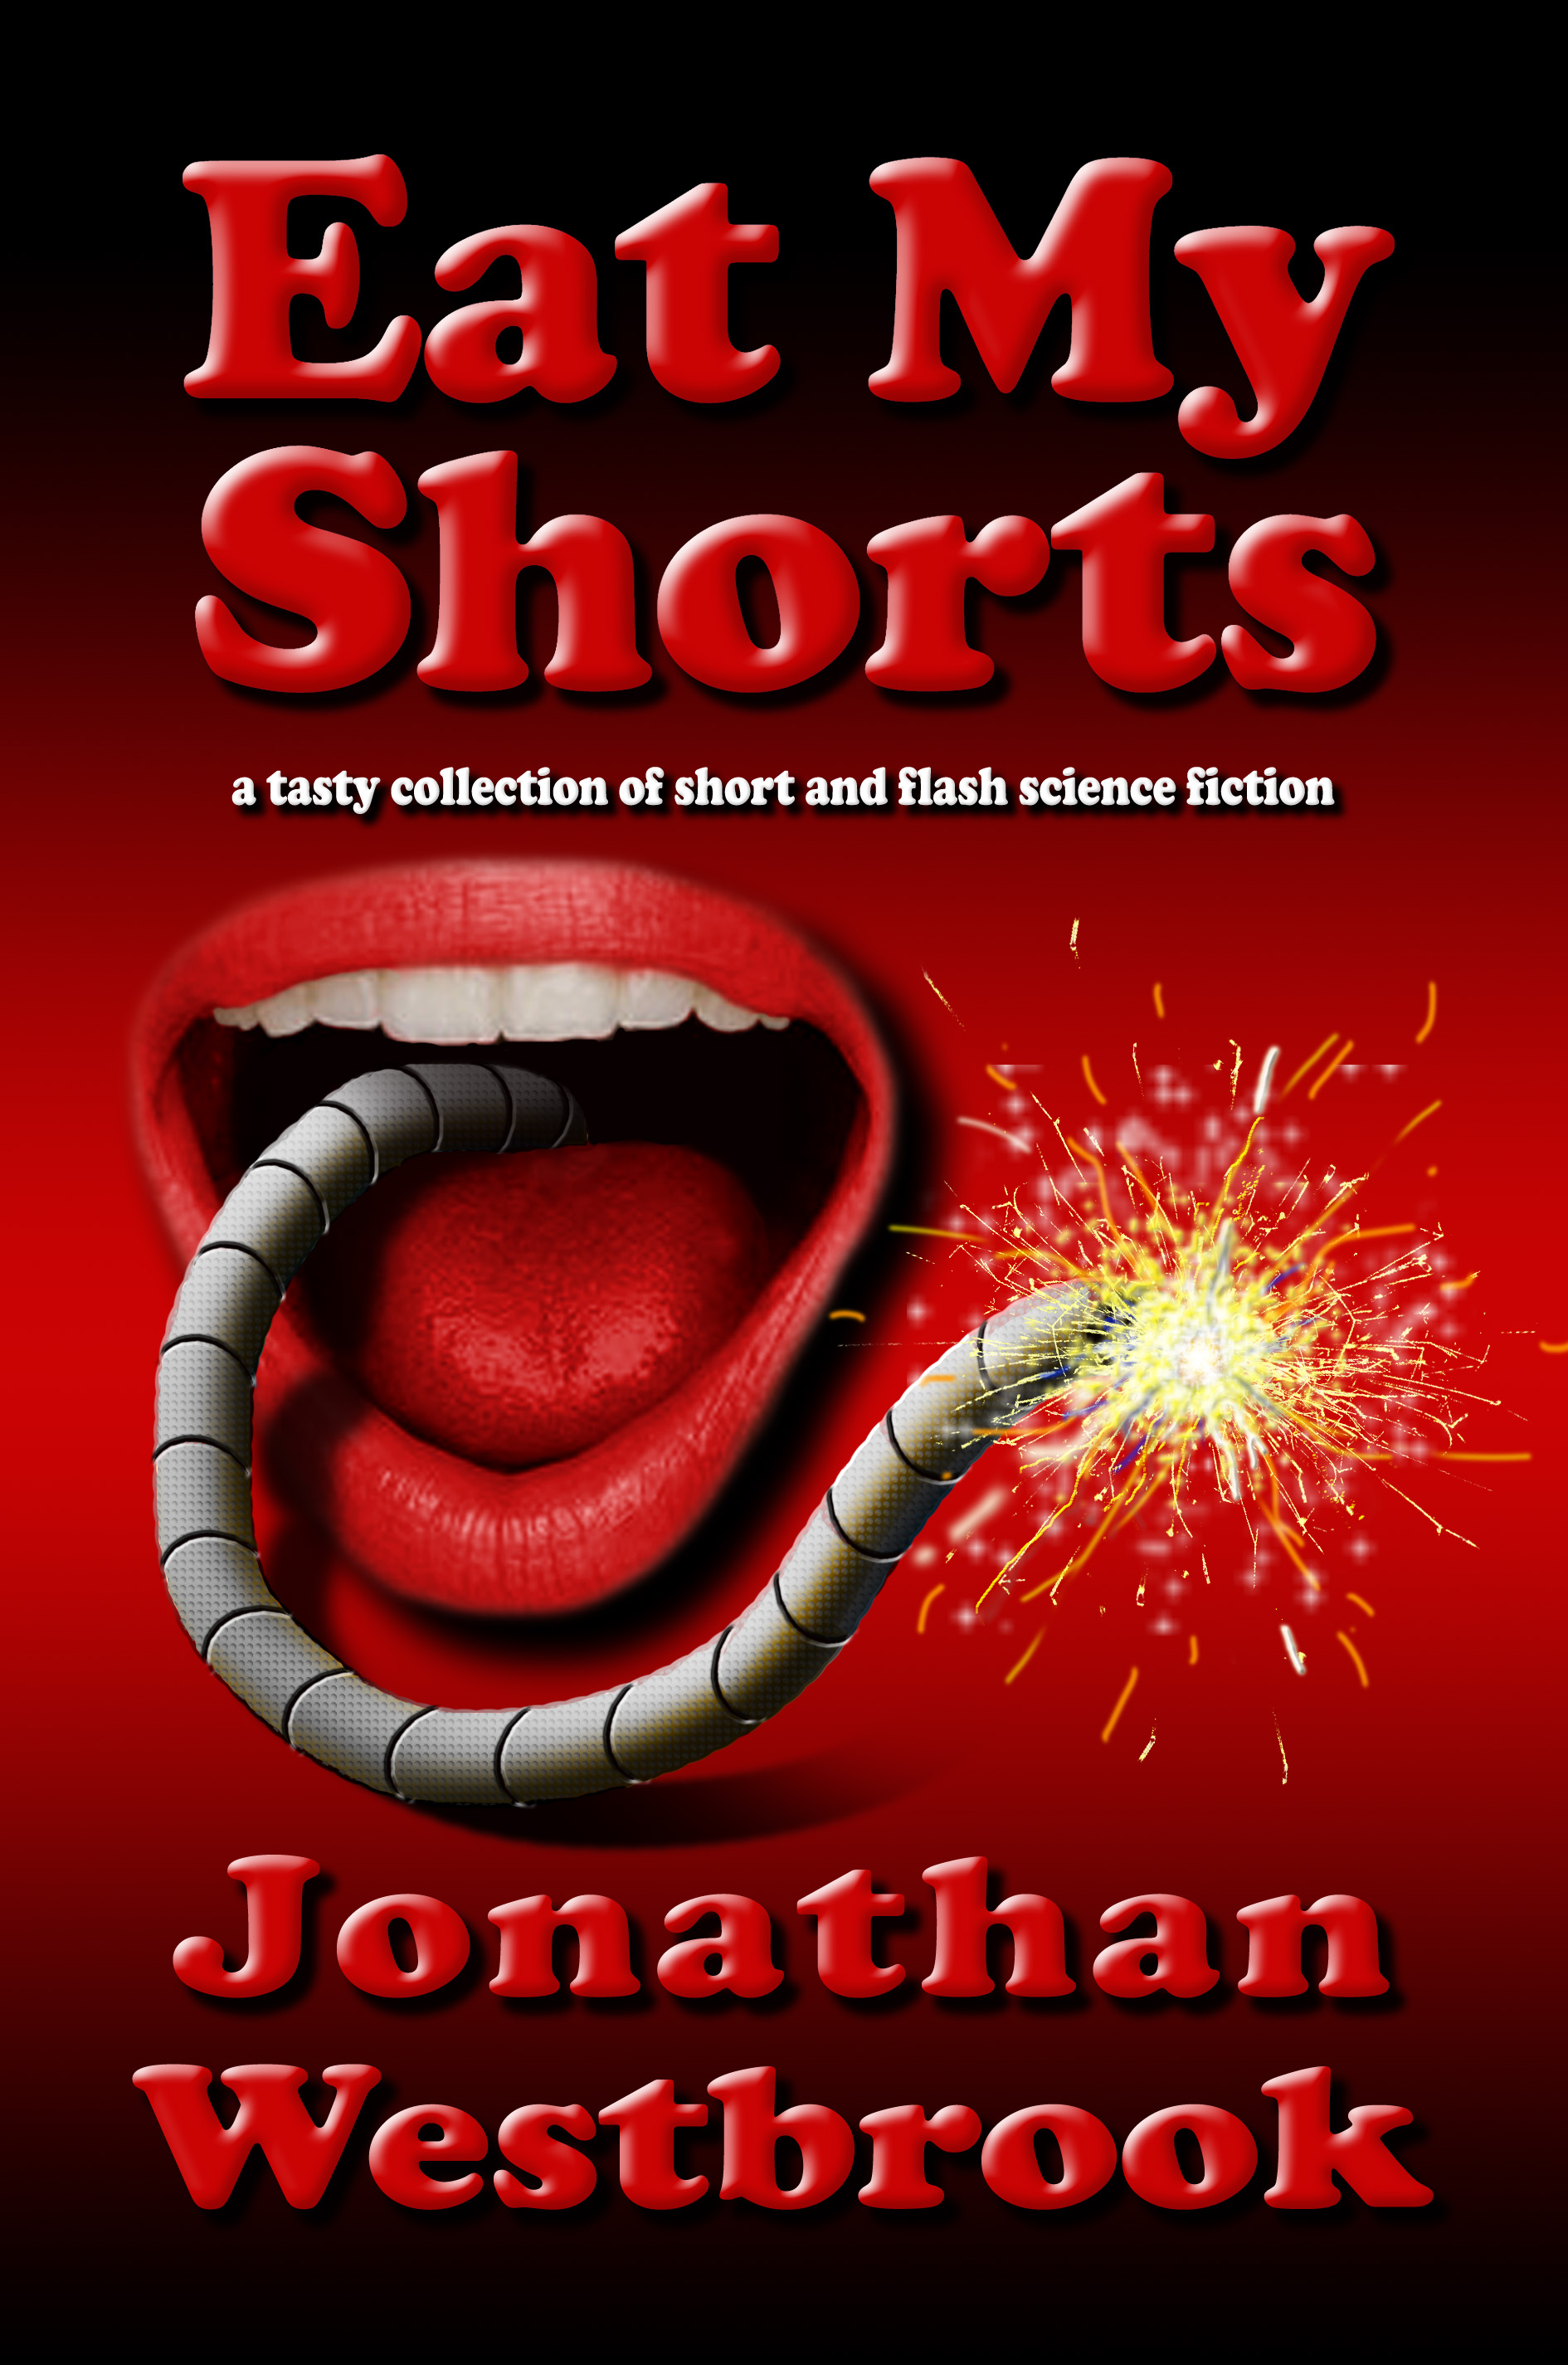 Eat My Shorts by Jonathan Westbrook